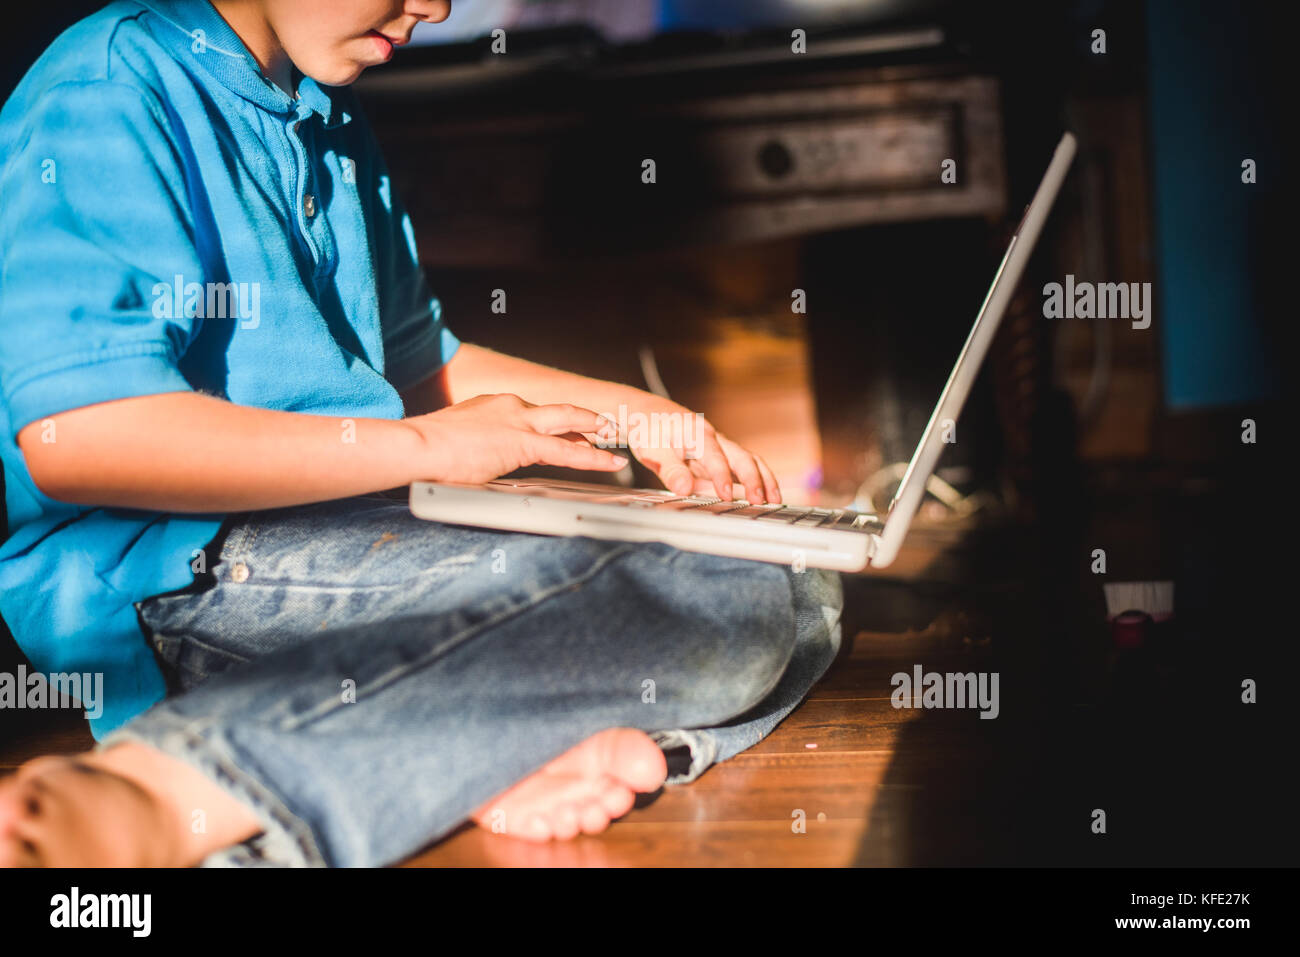 A child using a laptop. Stock Photo